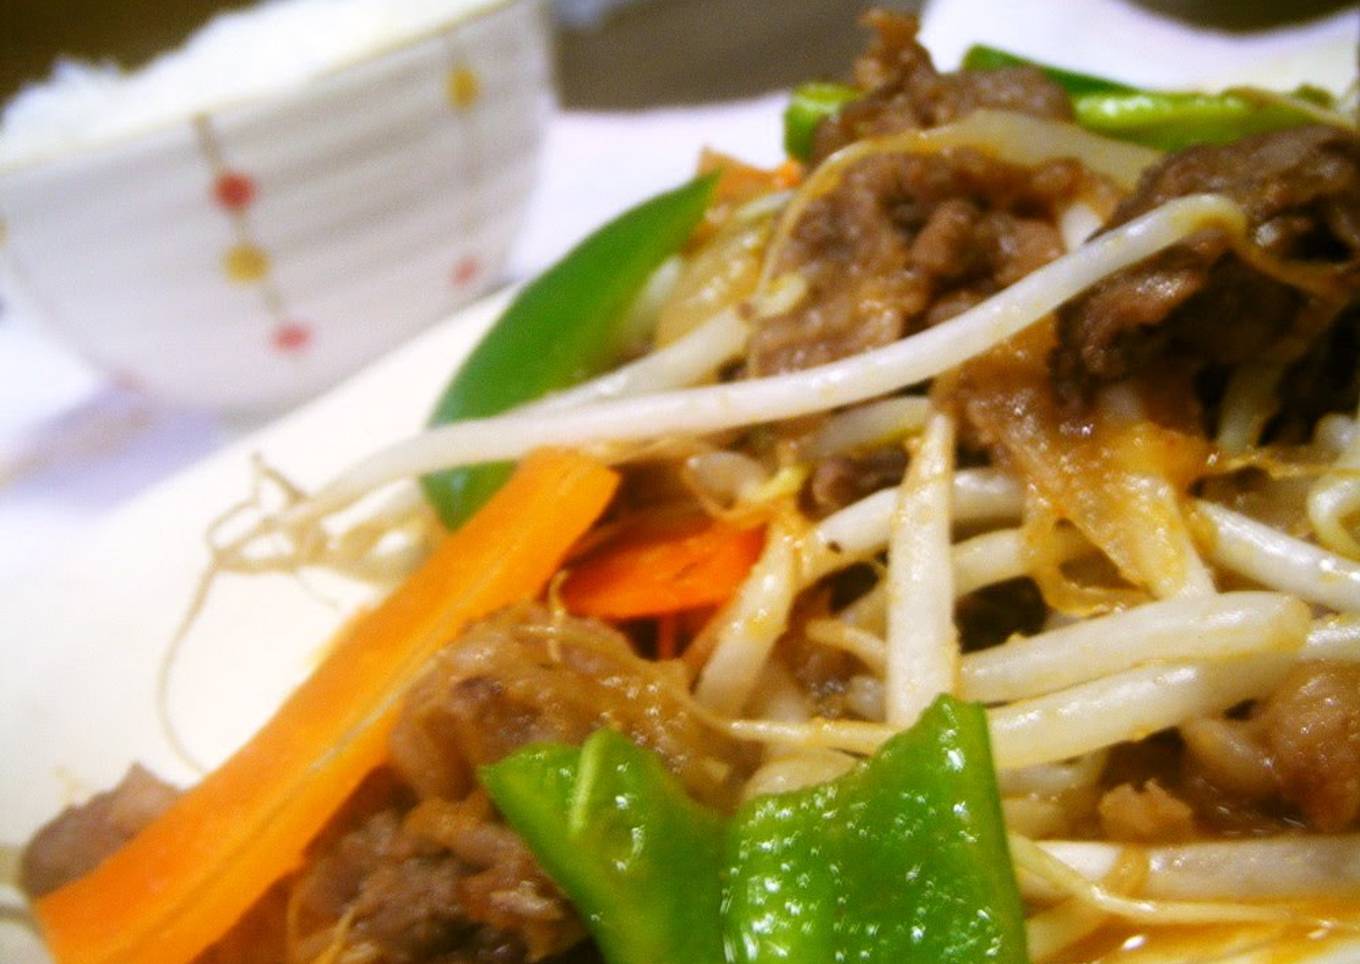 Spicy Beef Offcuts and Vegetable Stir-Fry